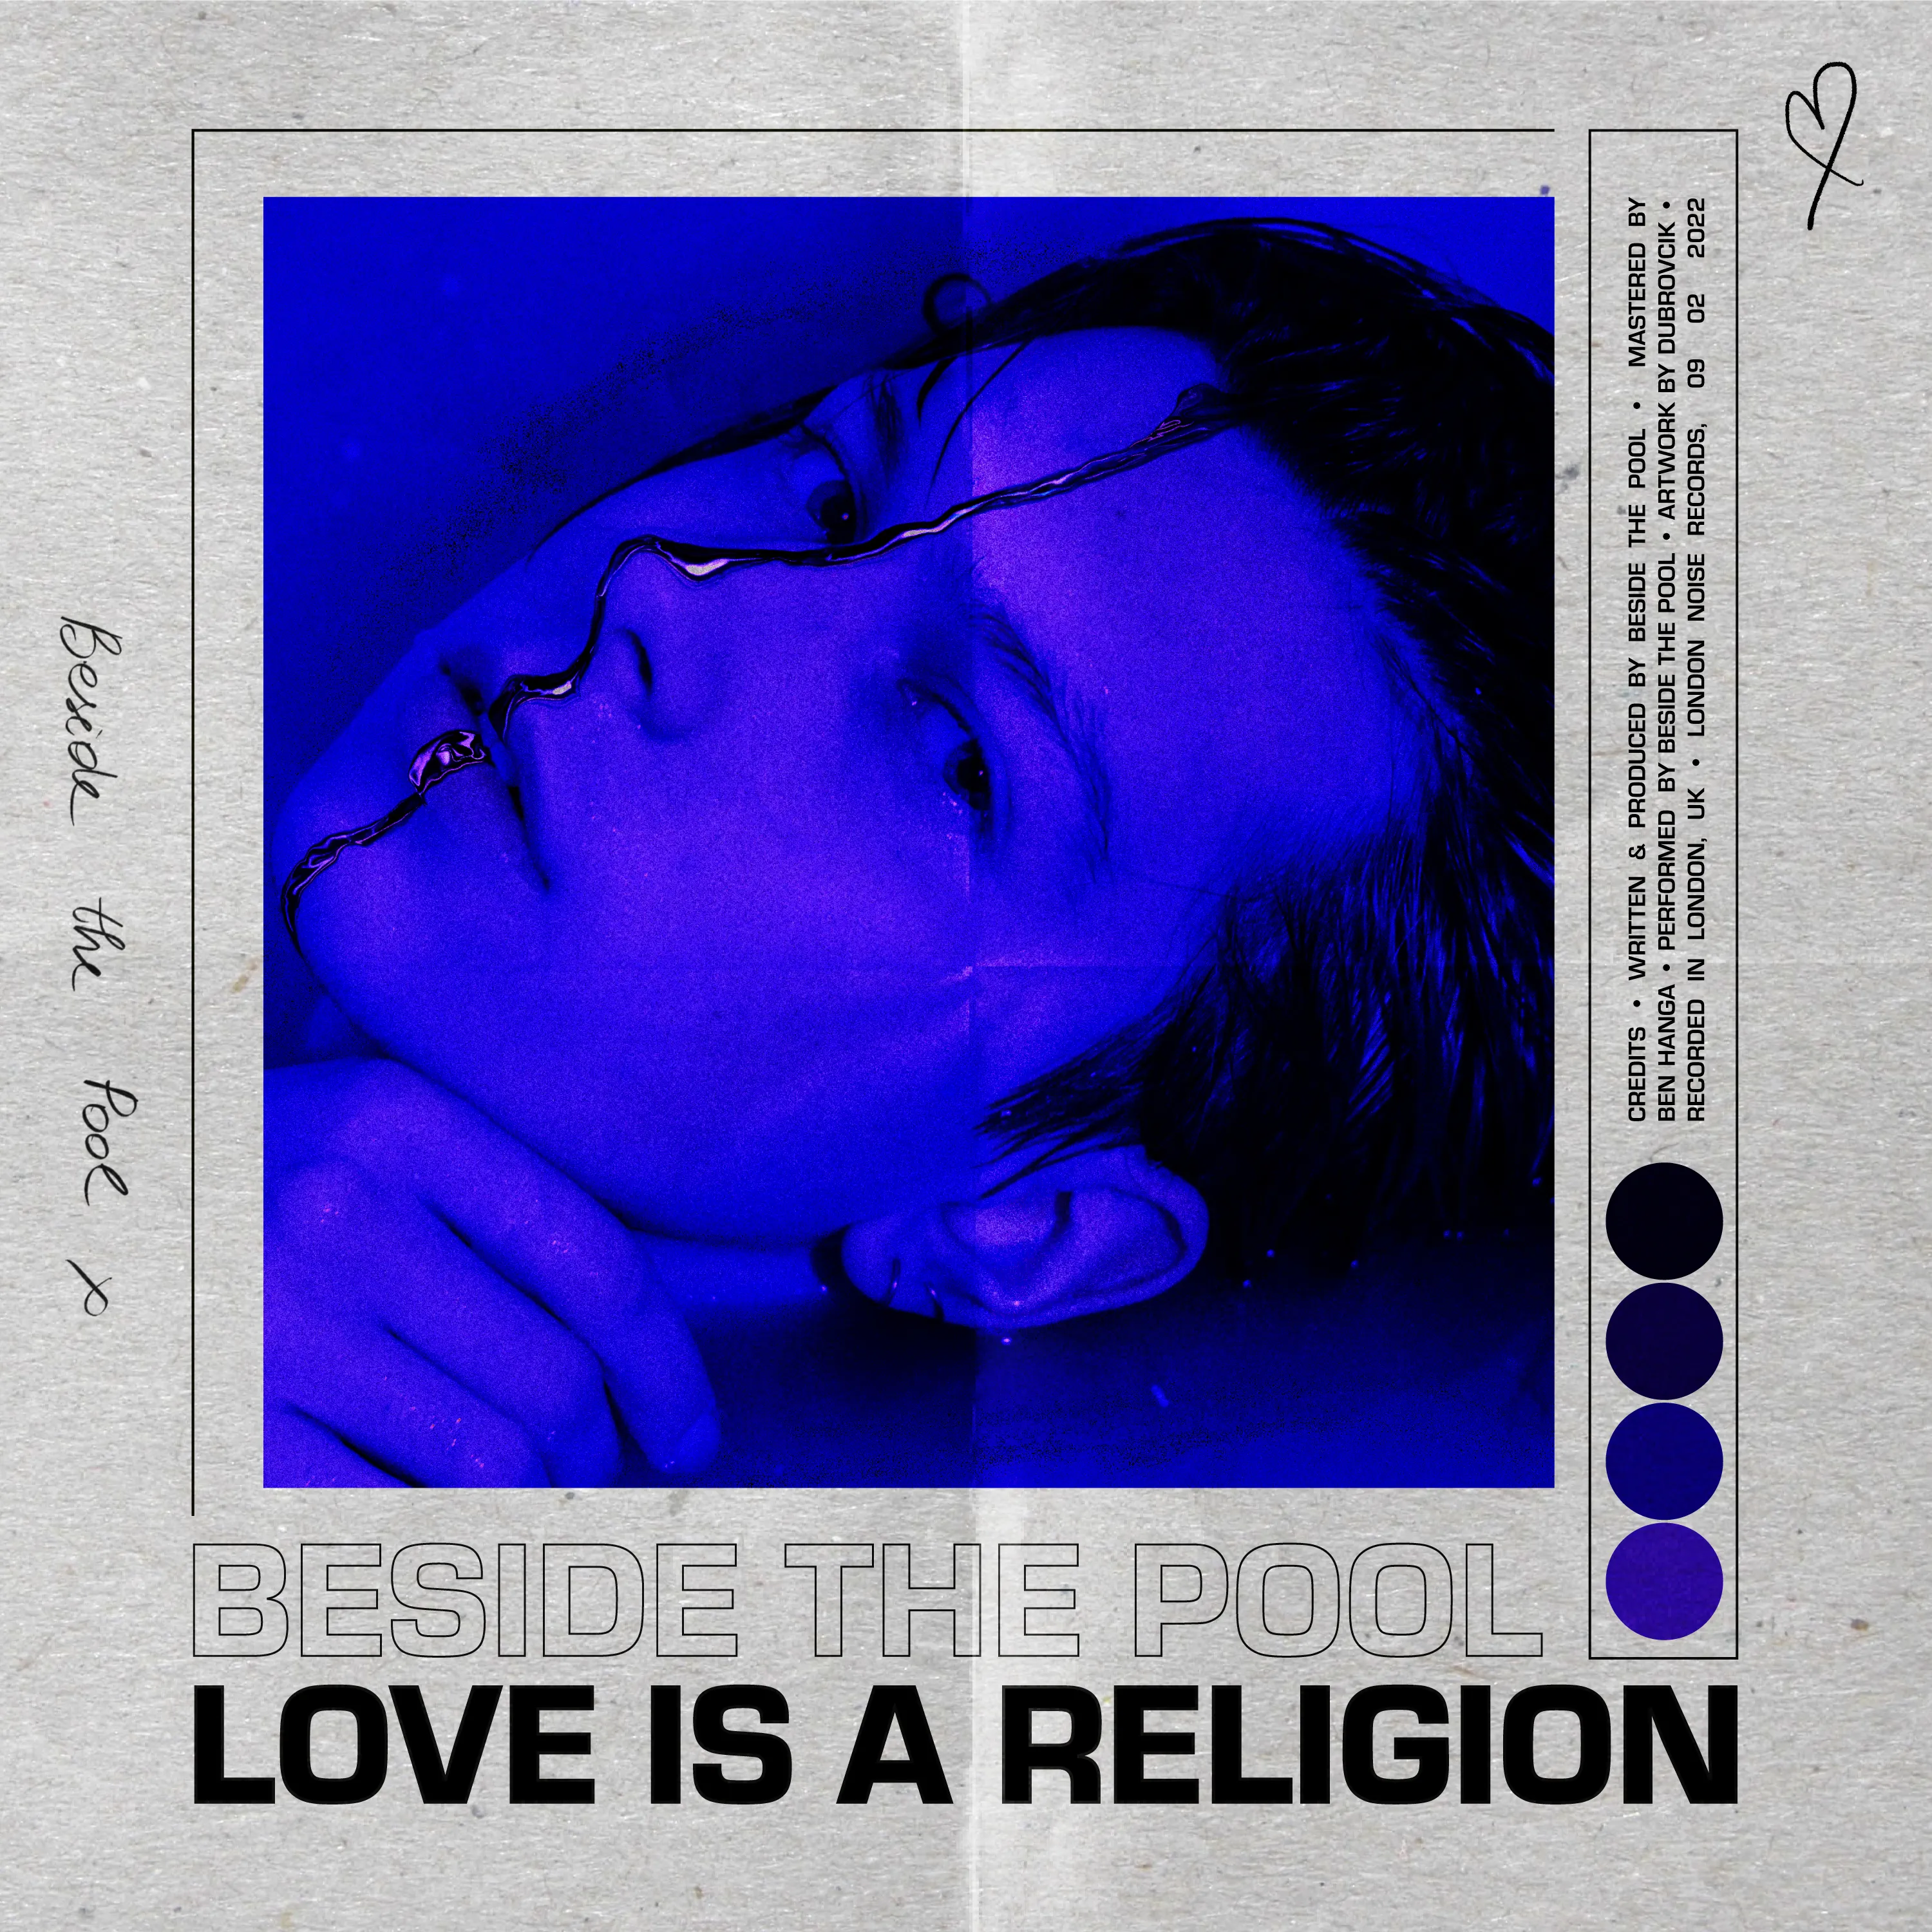 Love-is-a-religion